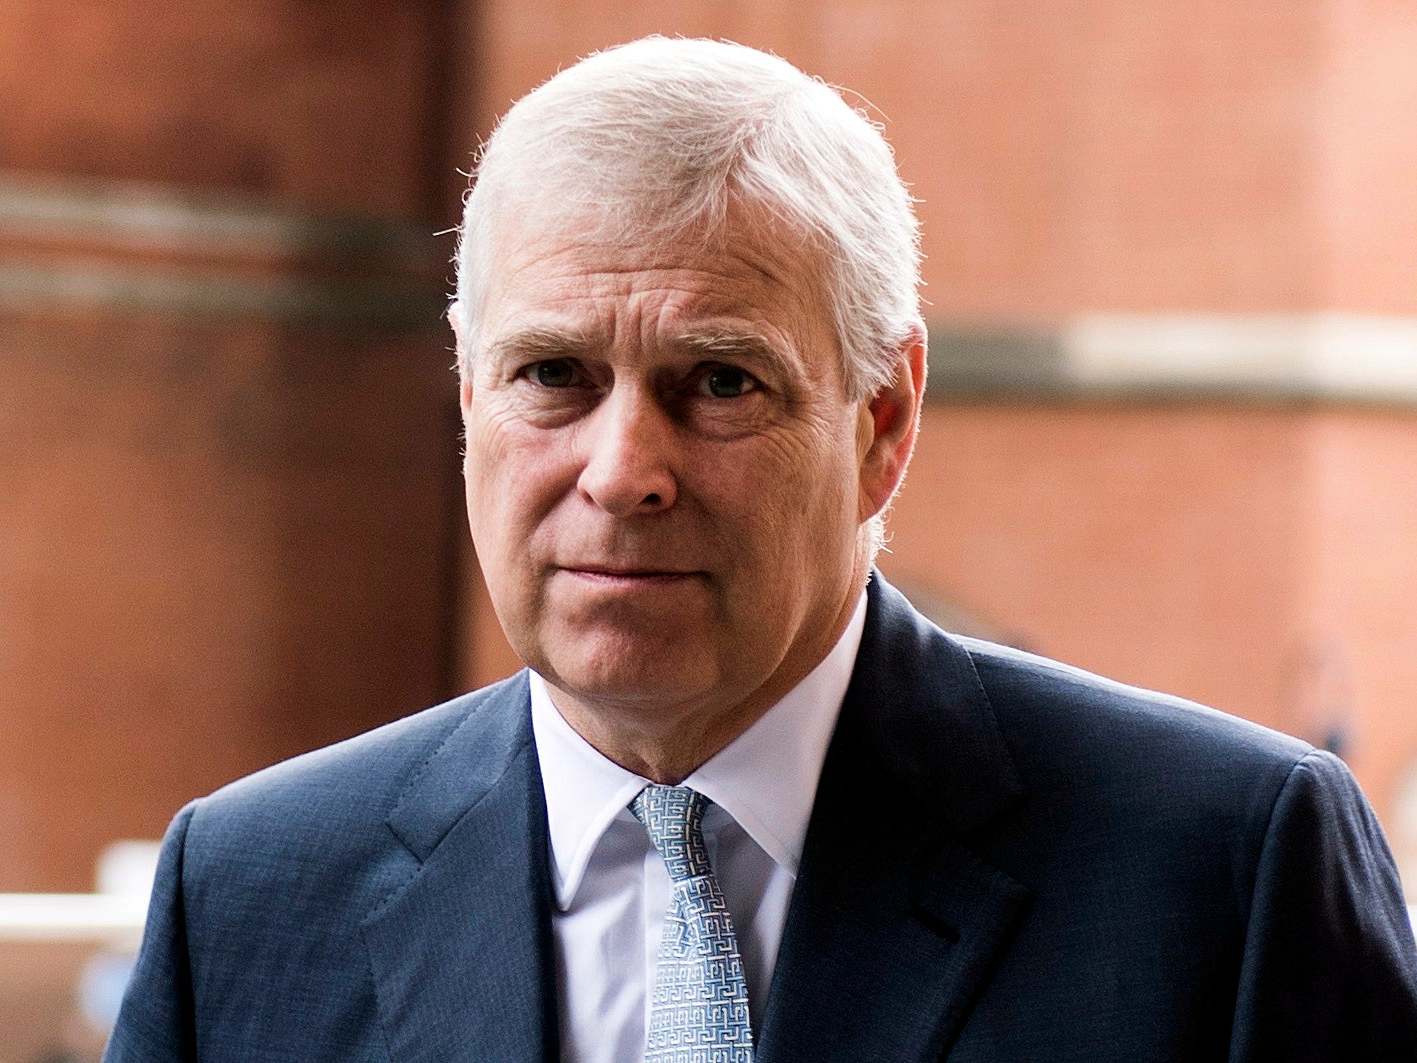 MP’s in Britain blocked from investigating money used in Prince Andrew’s settlement